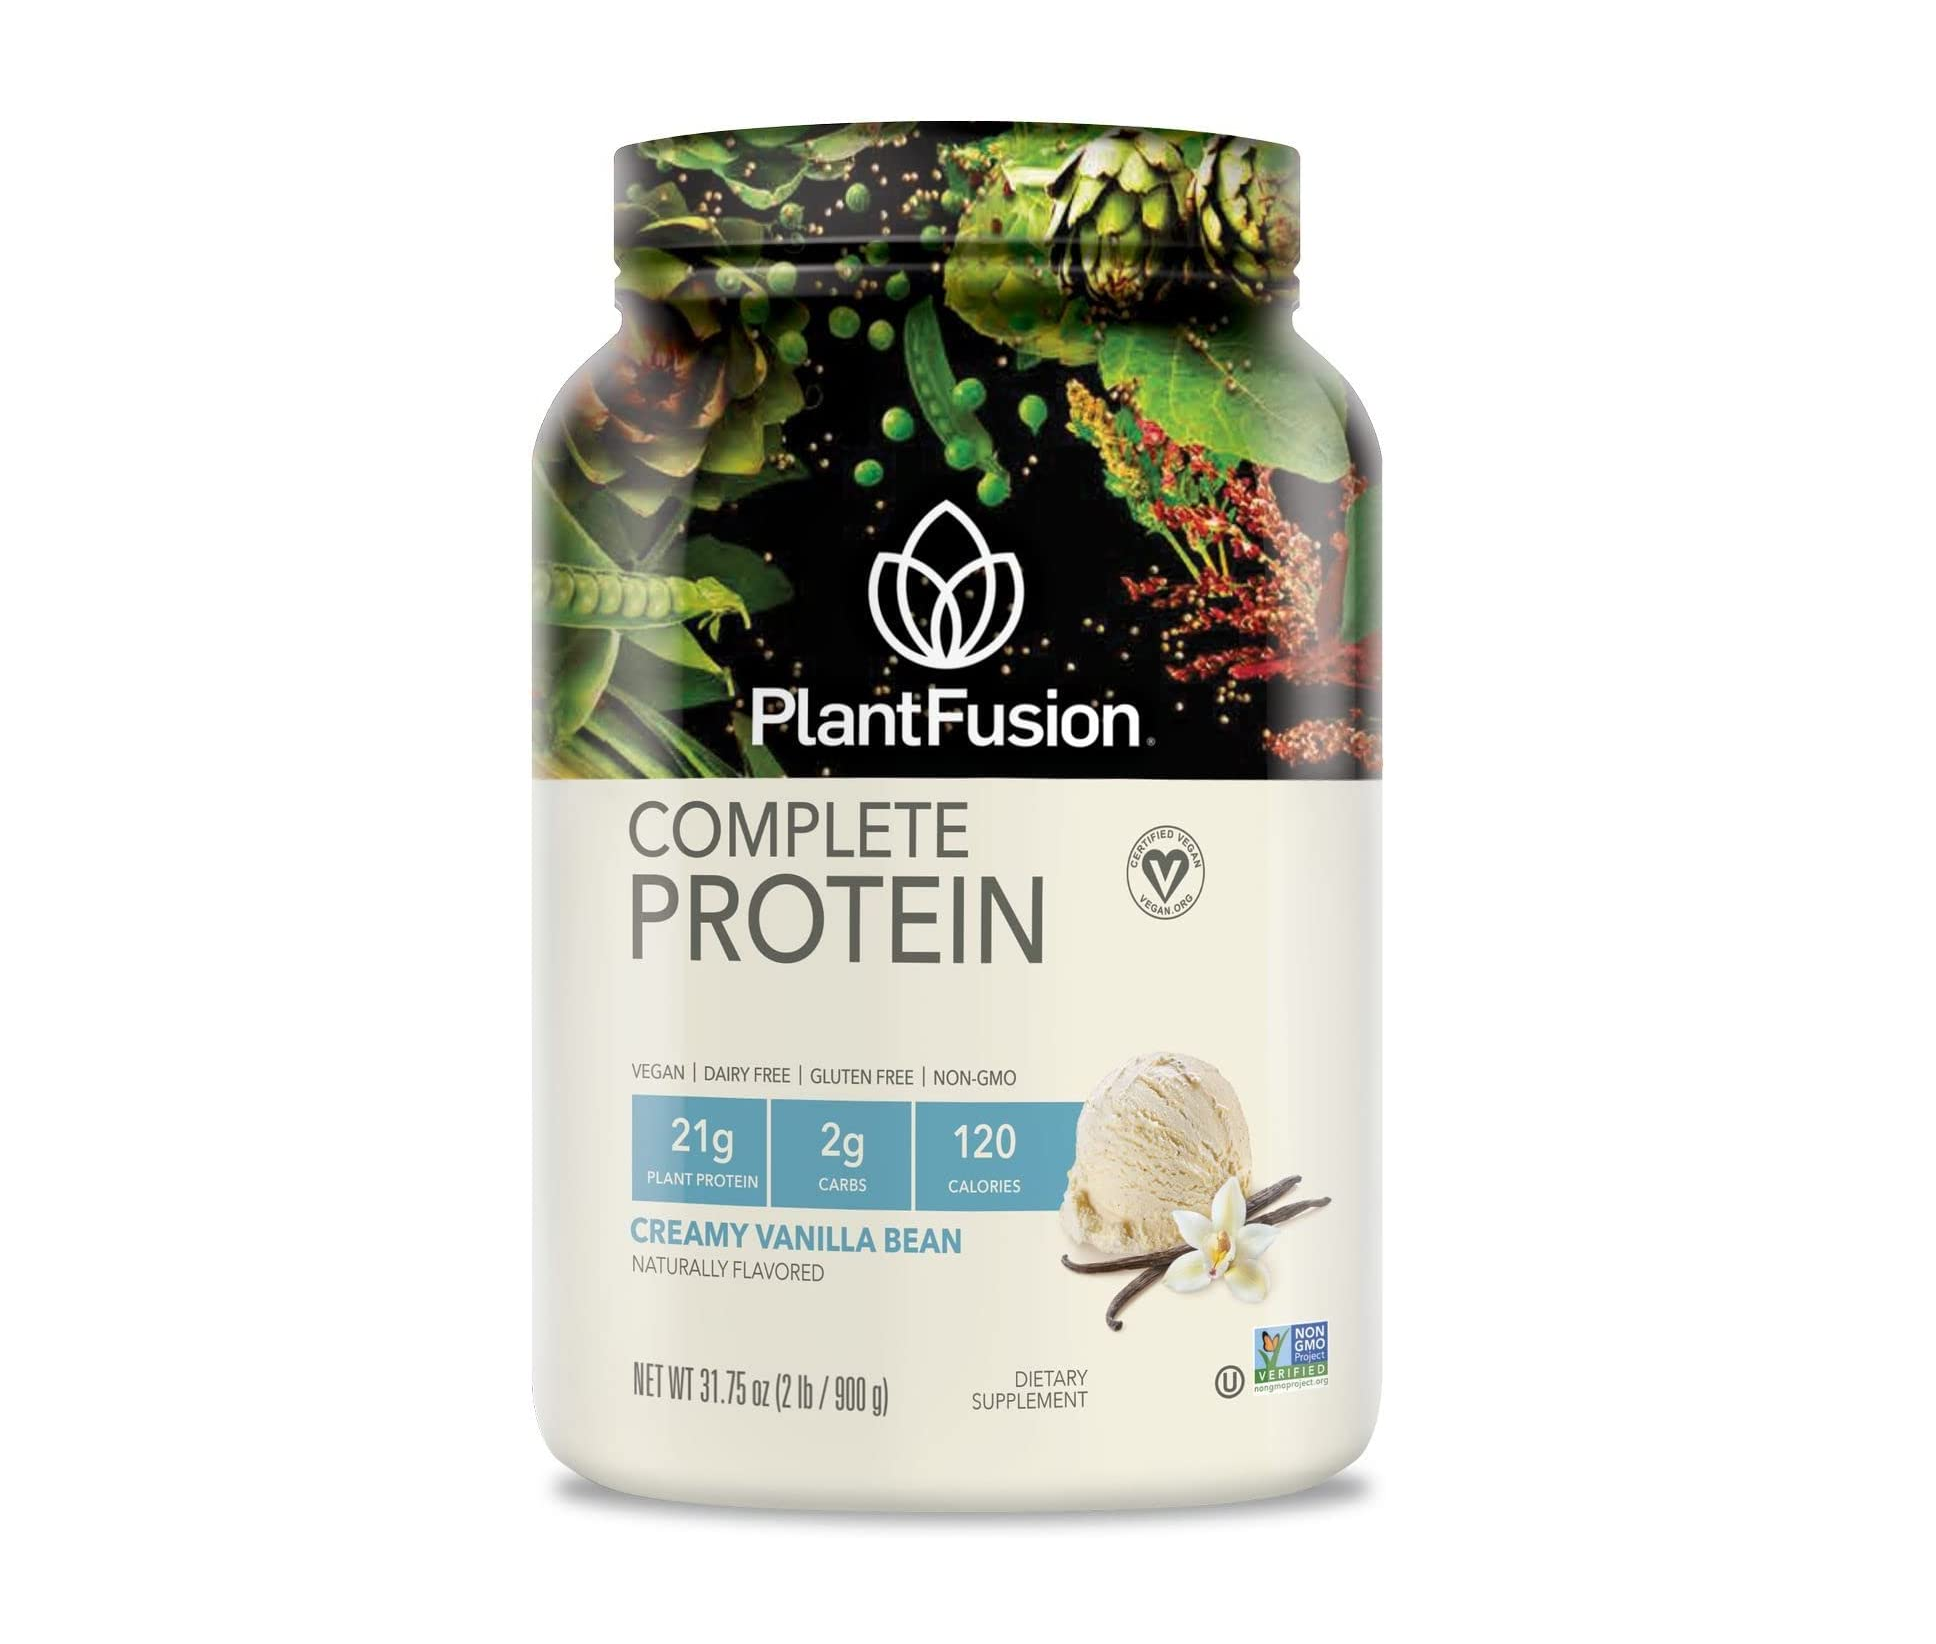 PlantFusion Complete Vegan Protein Powder for Muscle Gain